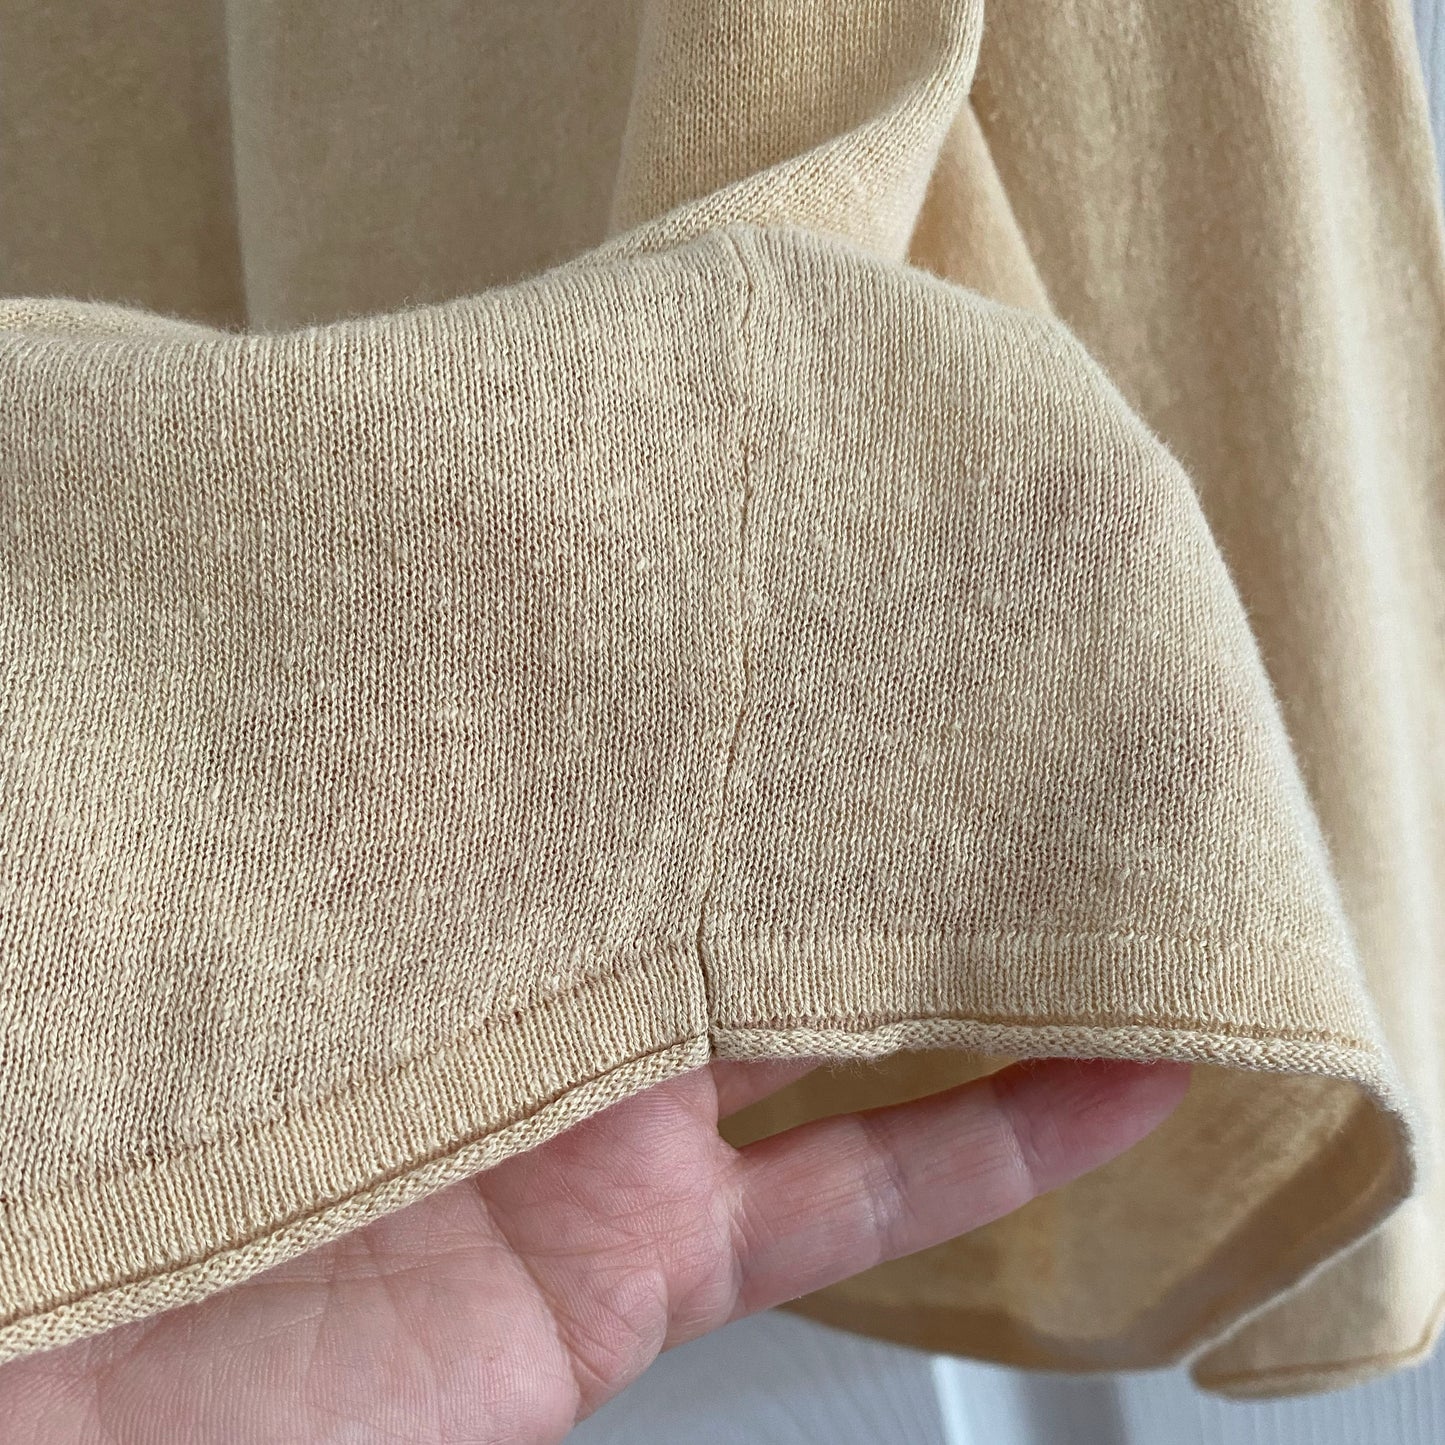 NAIF Cotton/Linen Sweater in Sand, size large